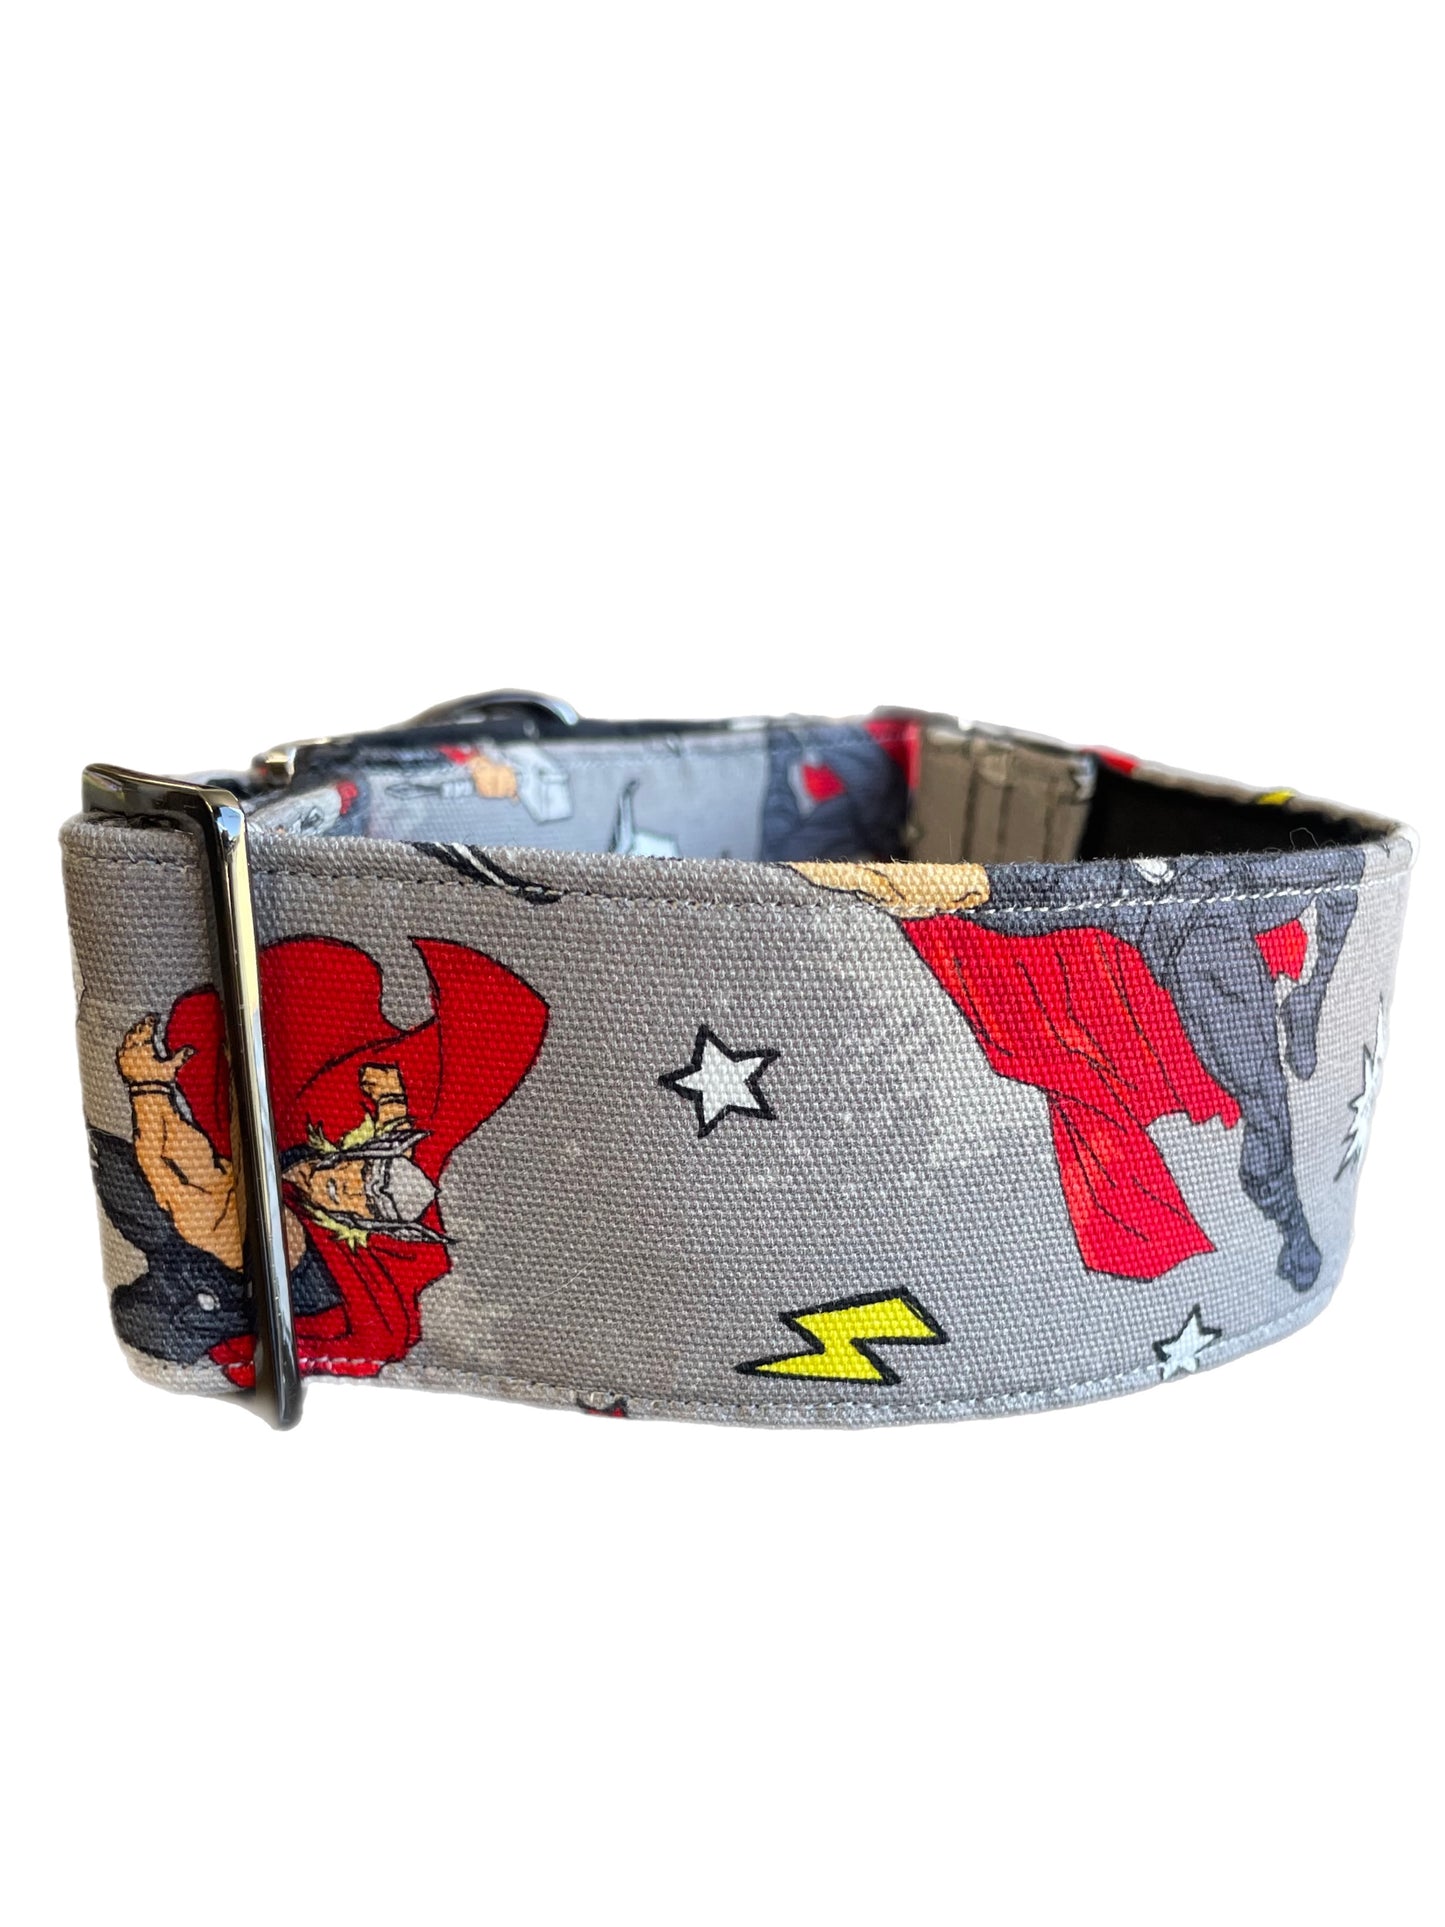 Thor design Cotton covered greyhound Martingale collar 50mm width sturdy